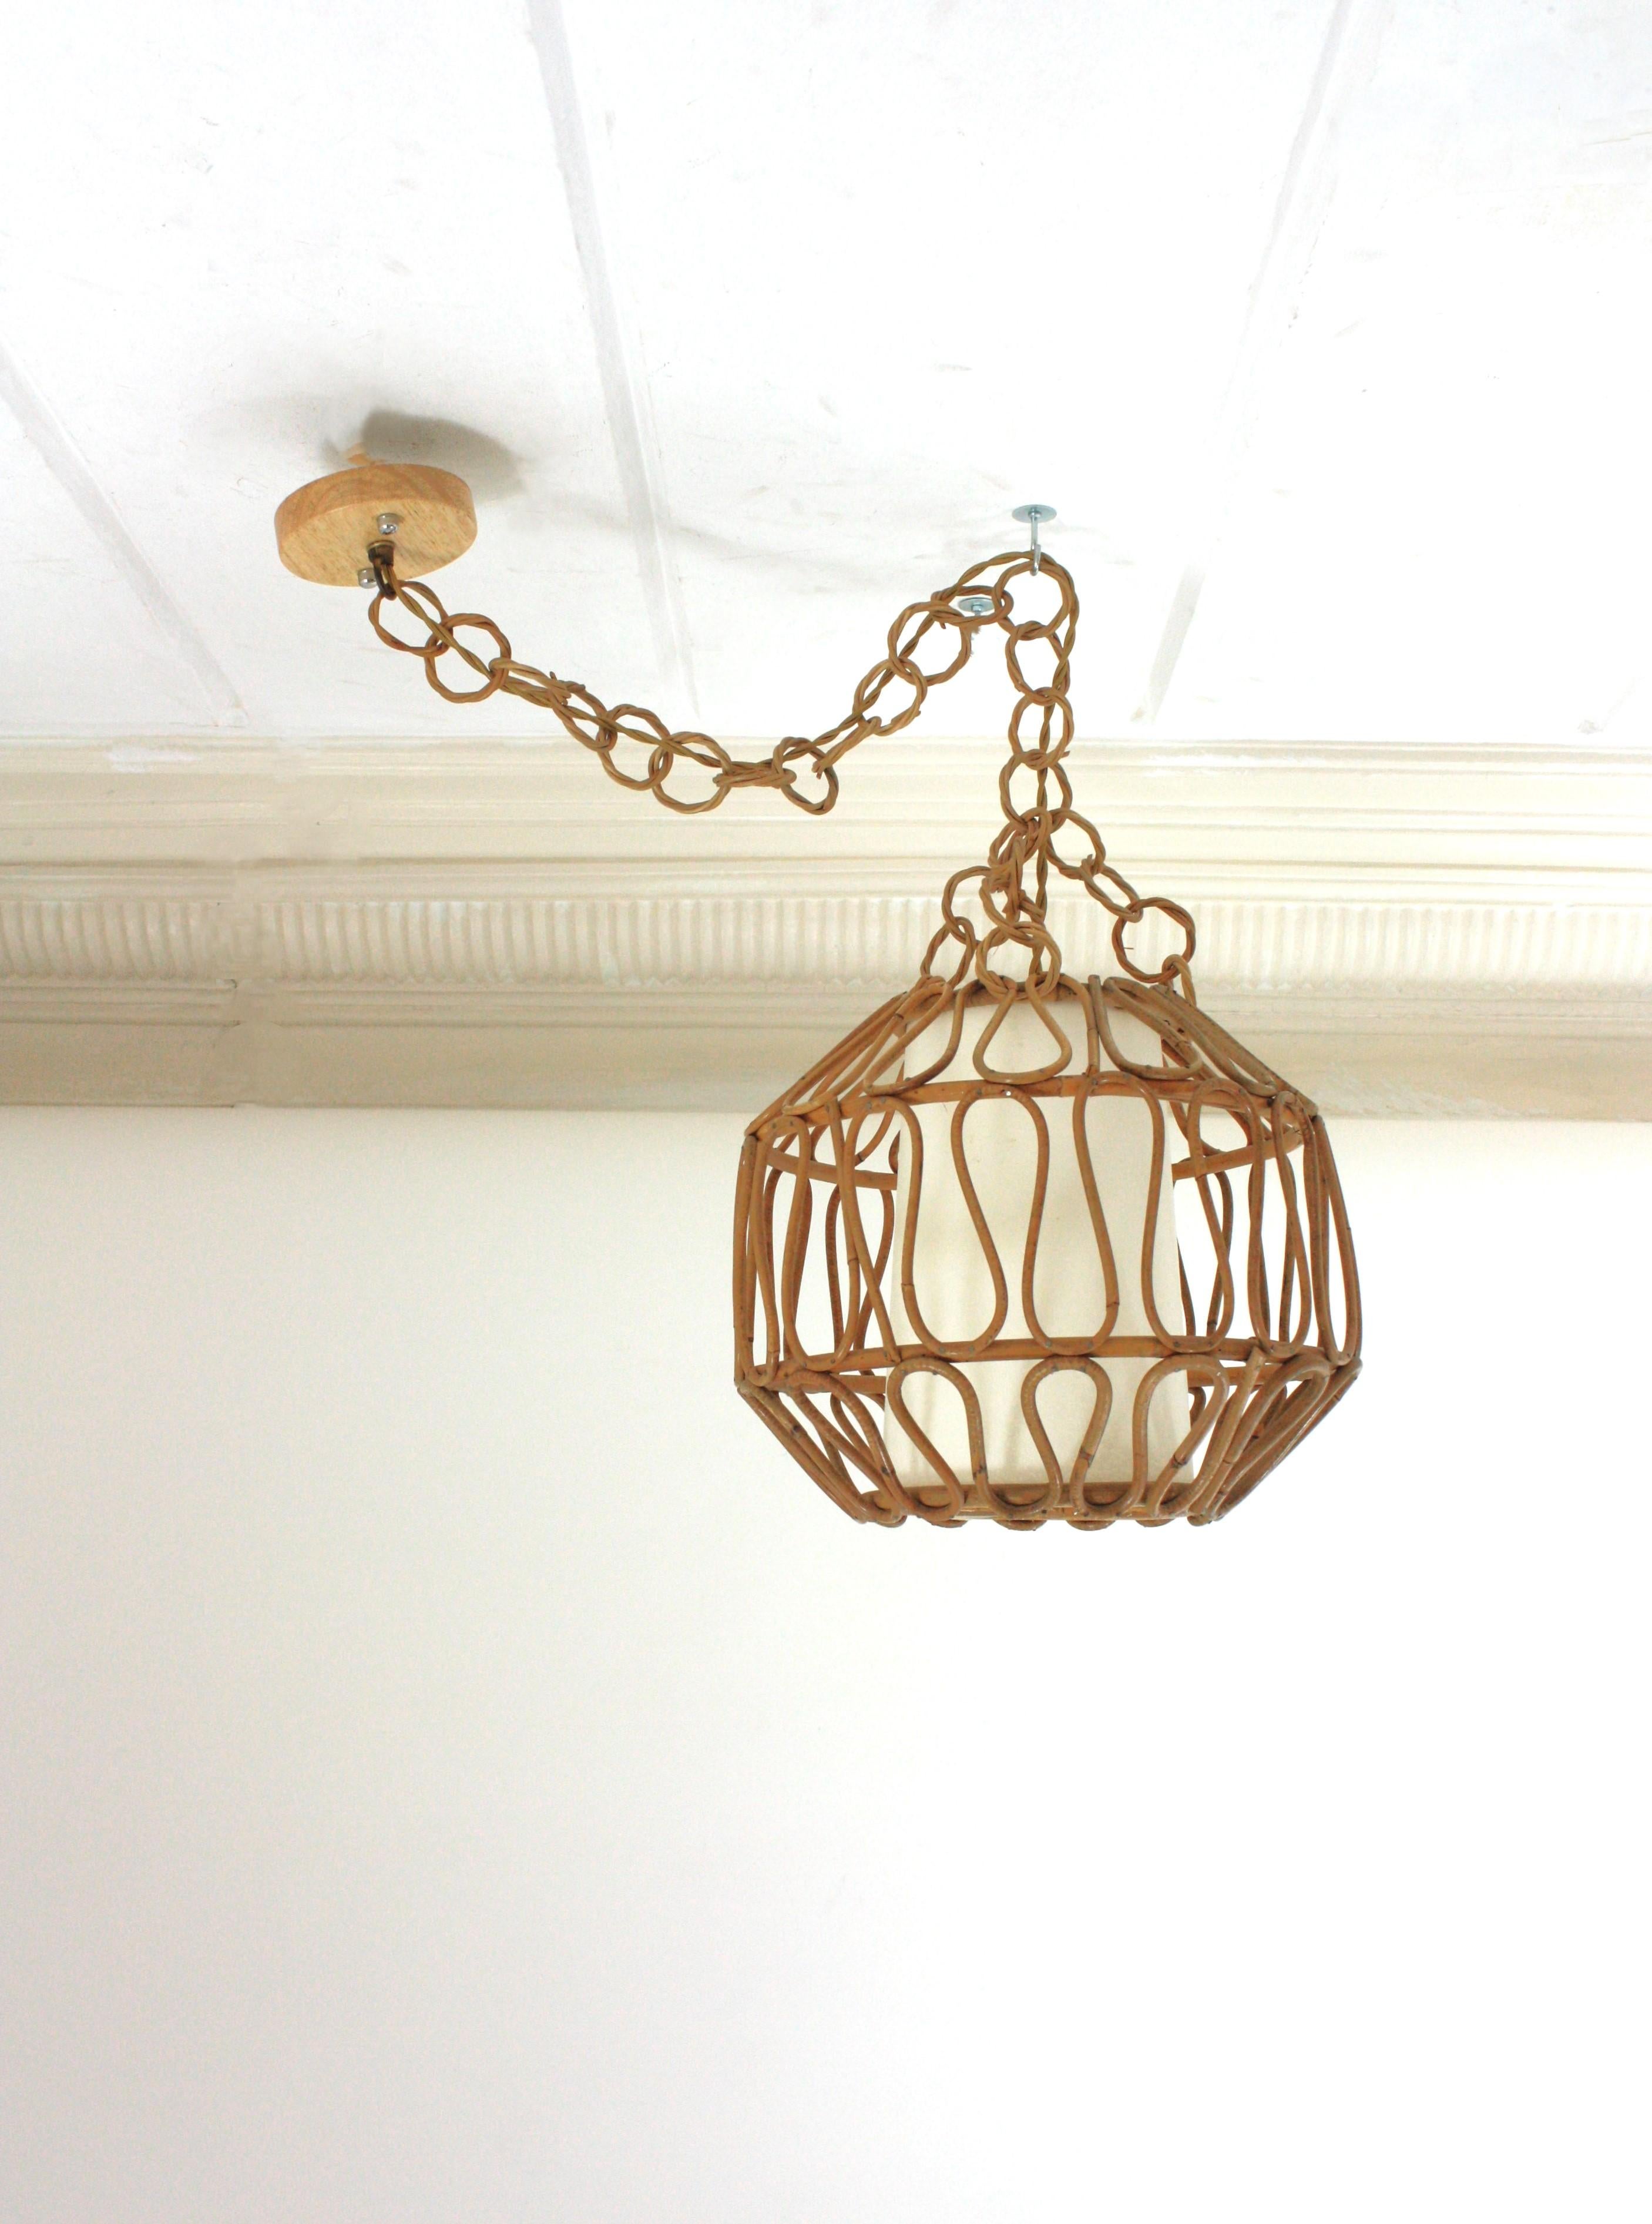 Rattan Globe Pendant Light or Lantern with Loop Details, Spain, 1960s For Sale 9